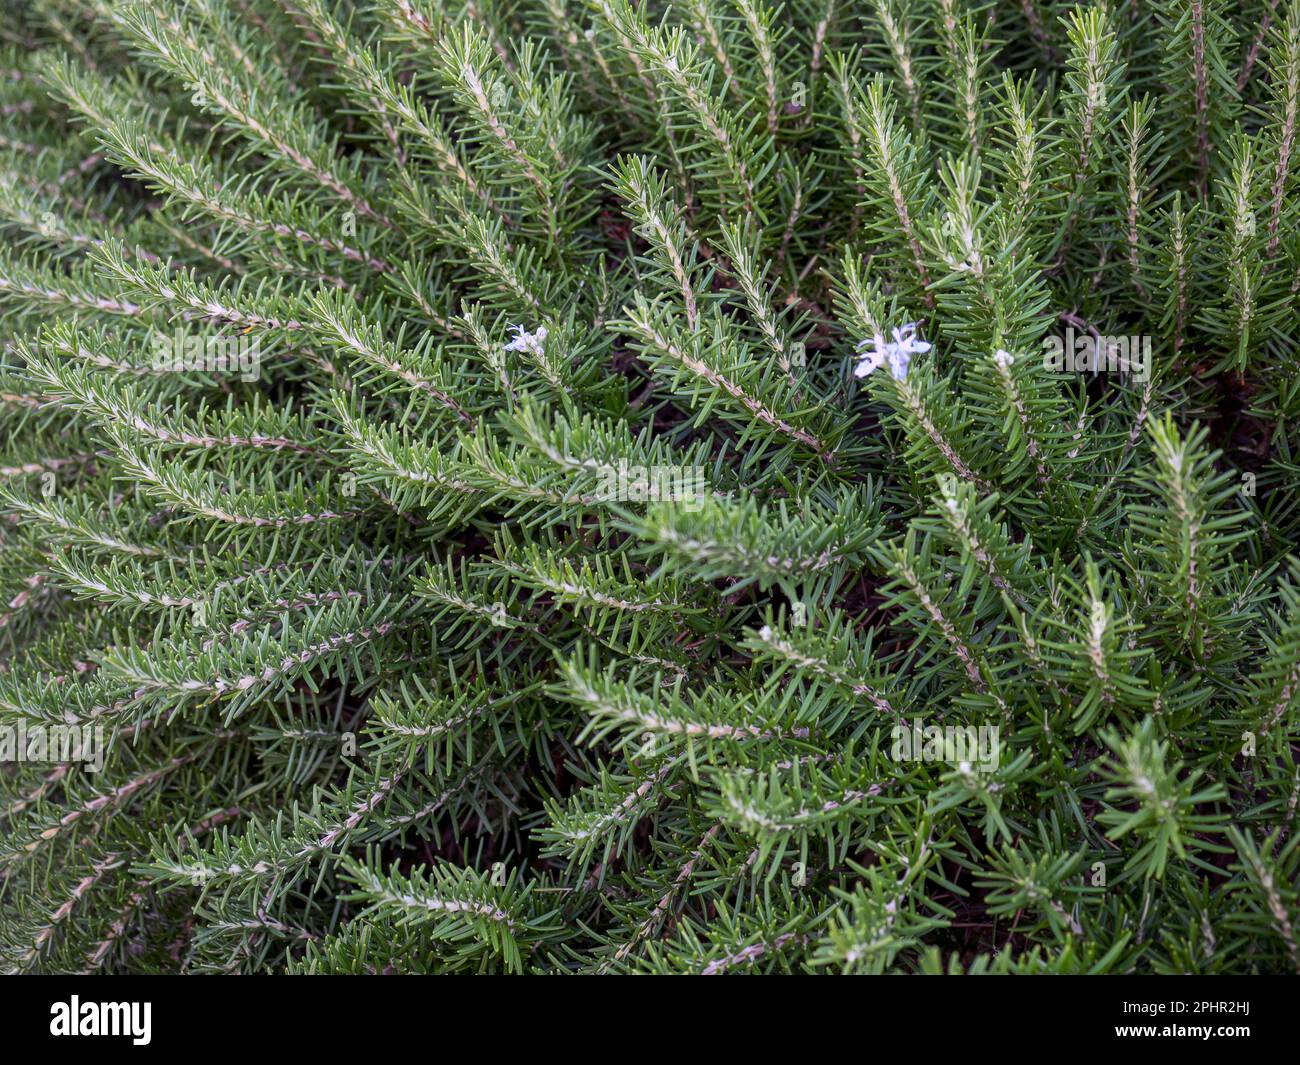 Rosemary (Salvia rosmarinus or Rosmarinus officinalis). This plant is an aromatic evergreen shrub with leaves similar to needles. The leaves are used Stock Photo